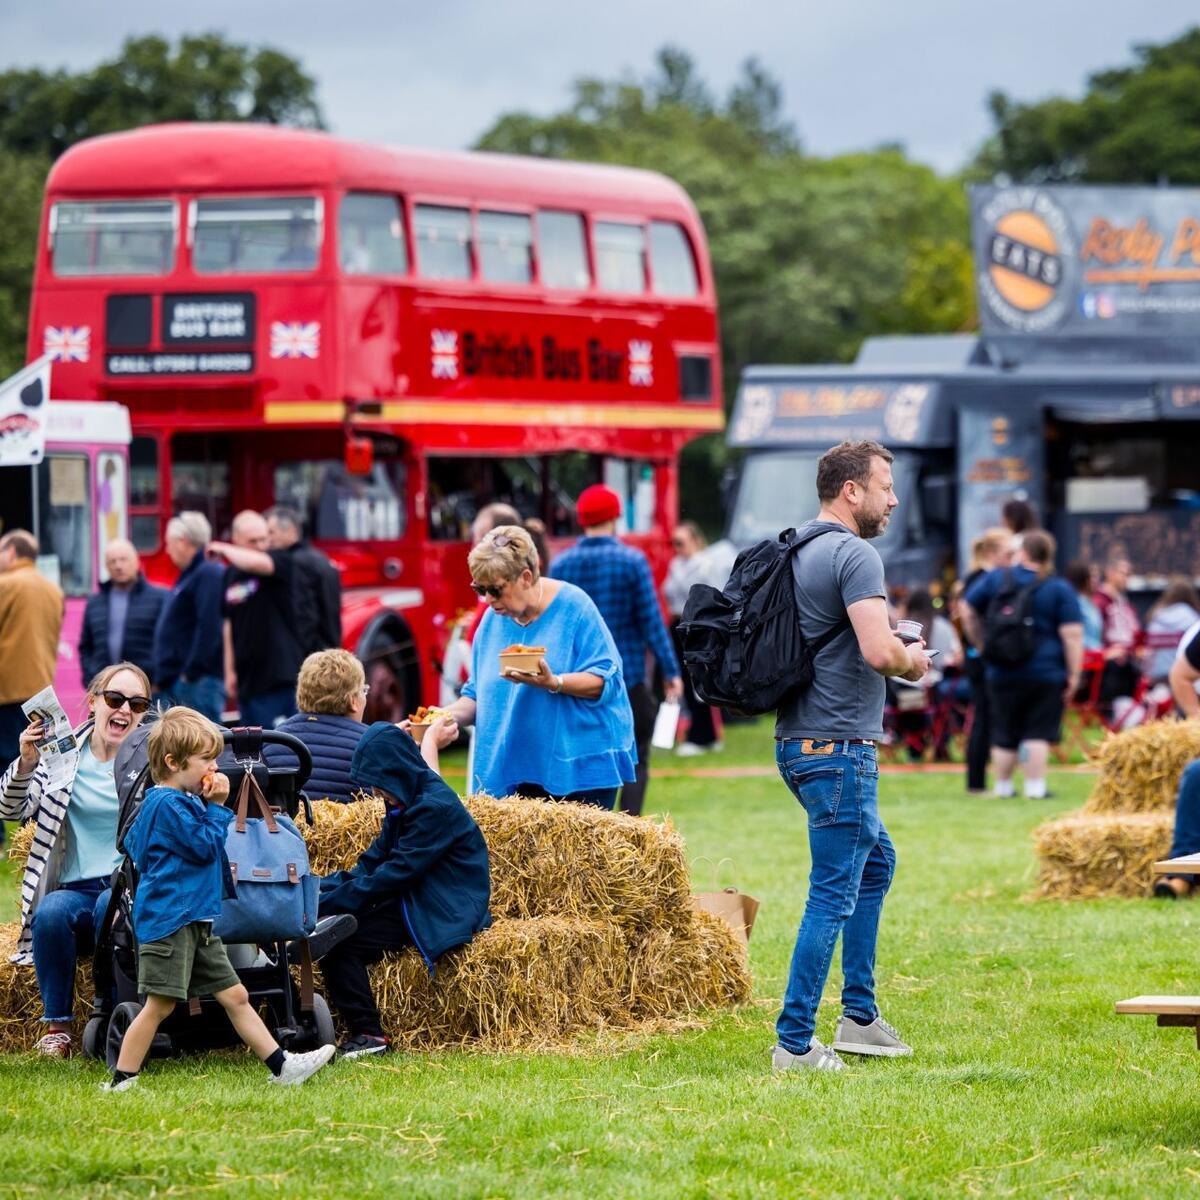 people sitting on hay bales at festival with red London bus